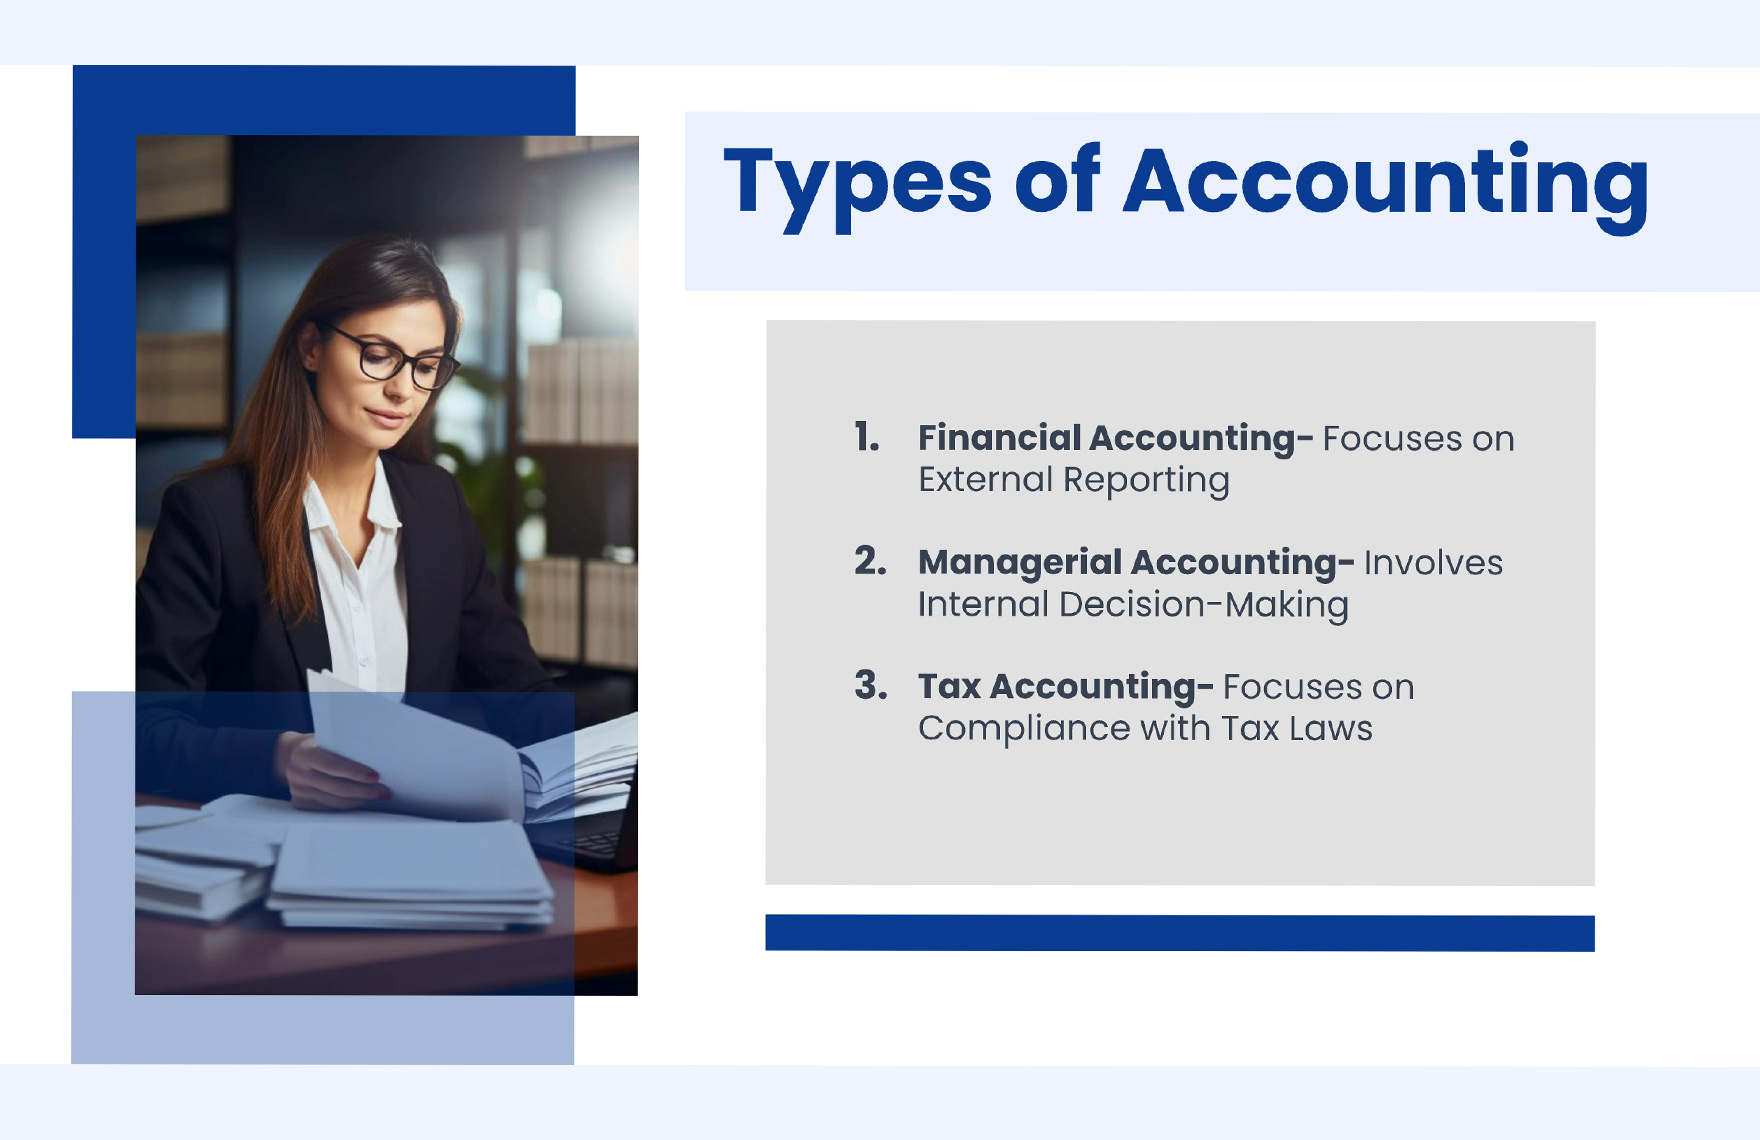 Introduction to Accounting PPT Template